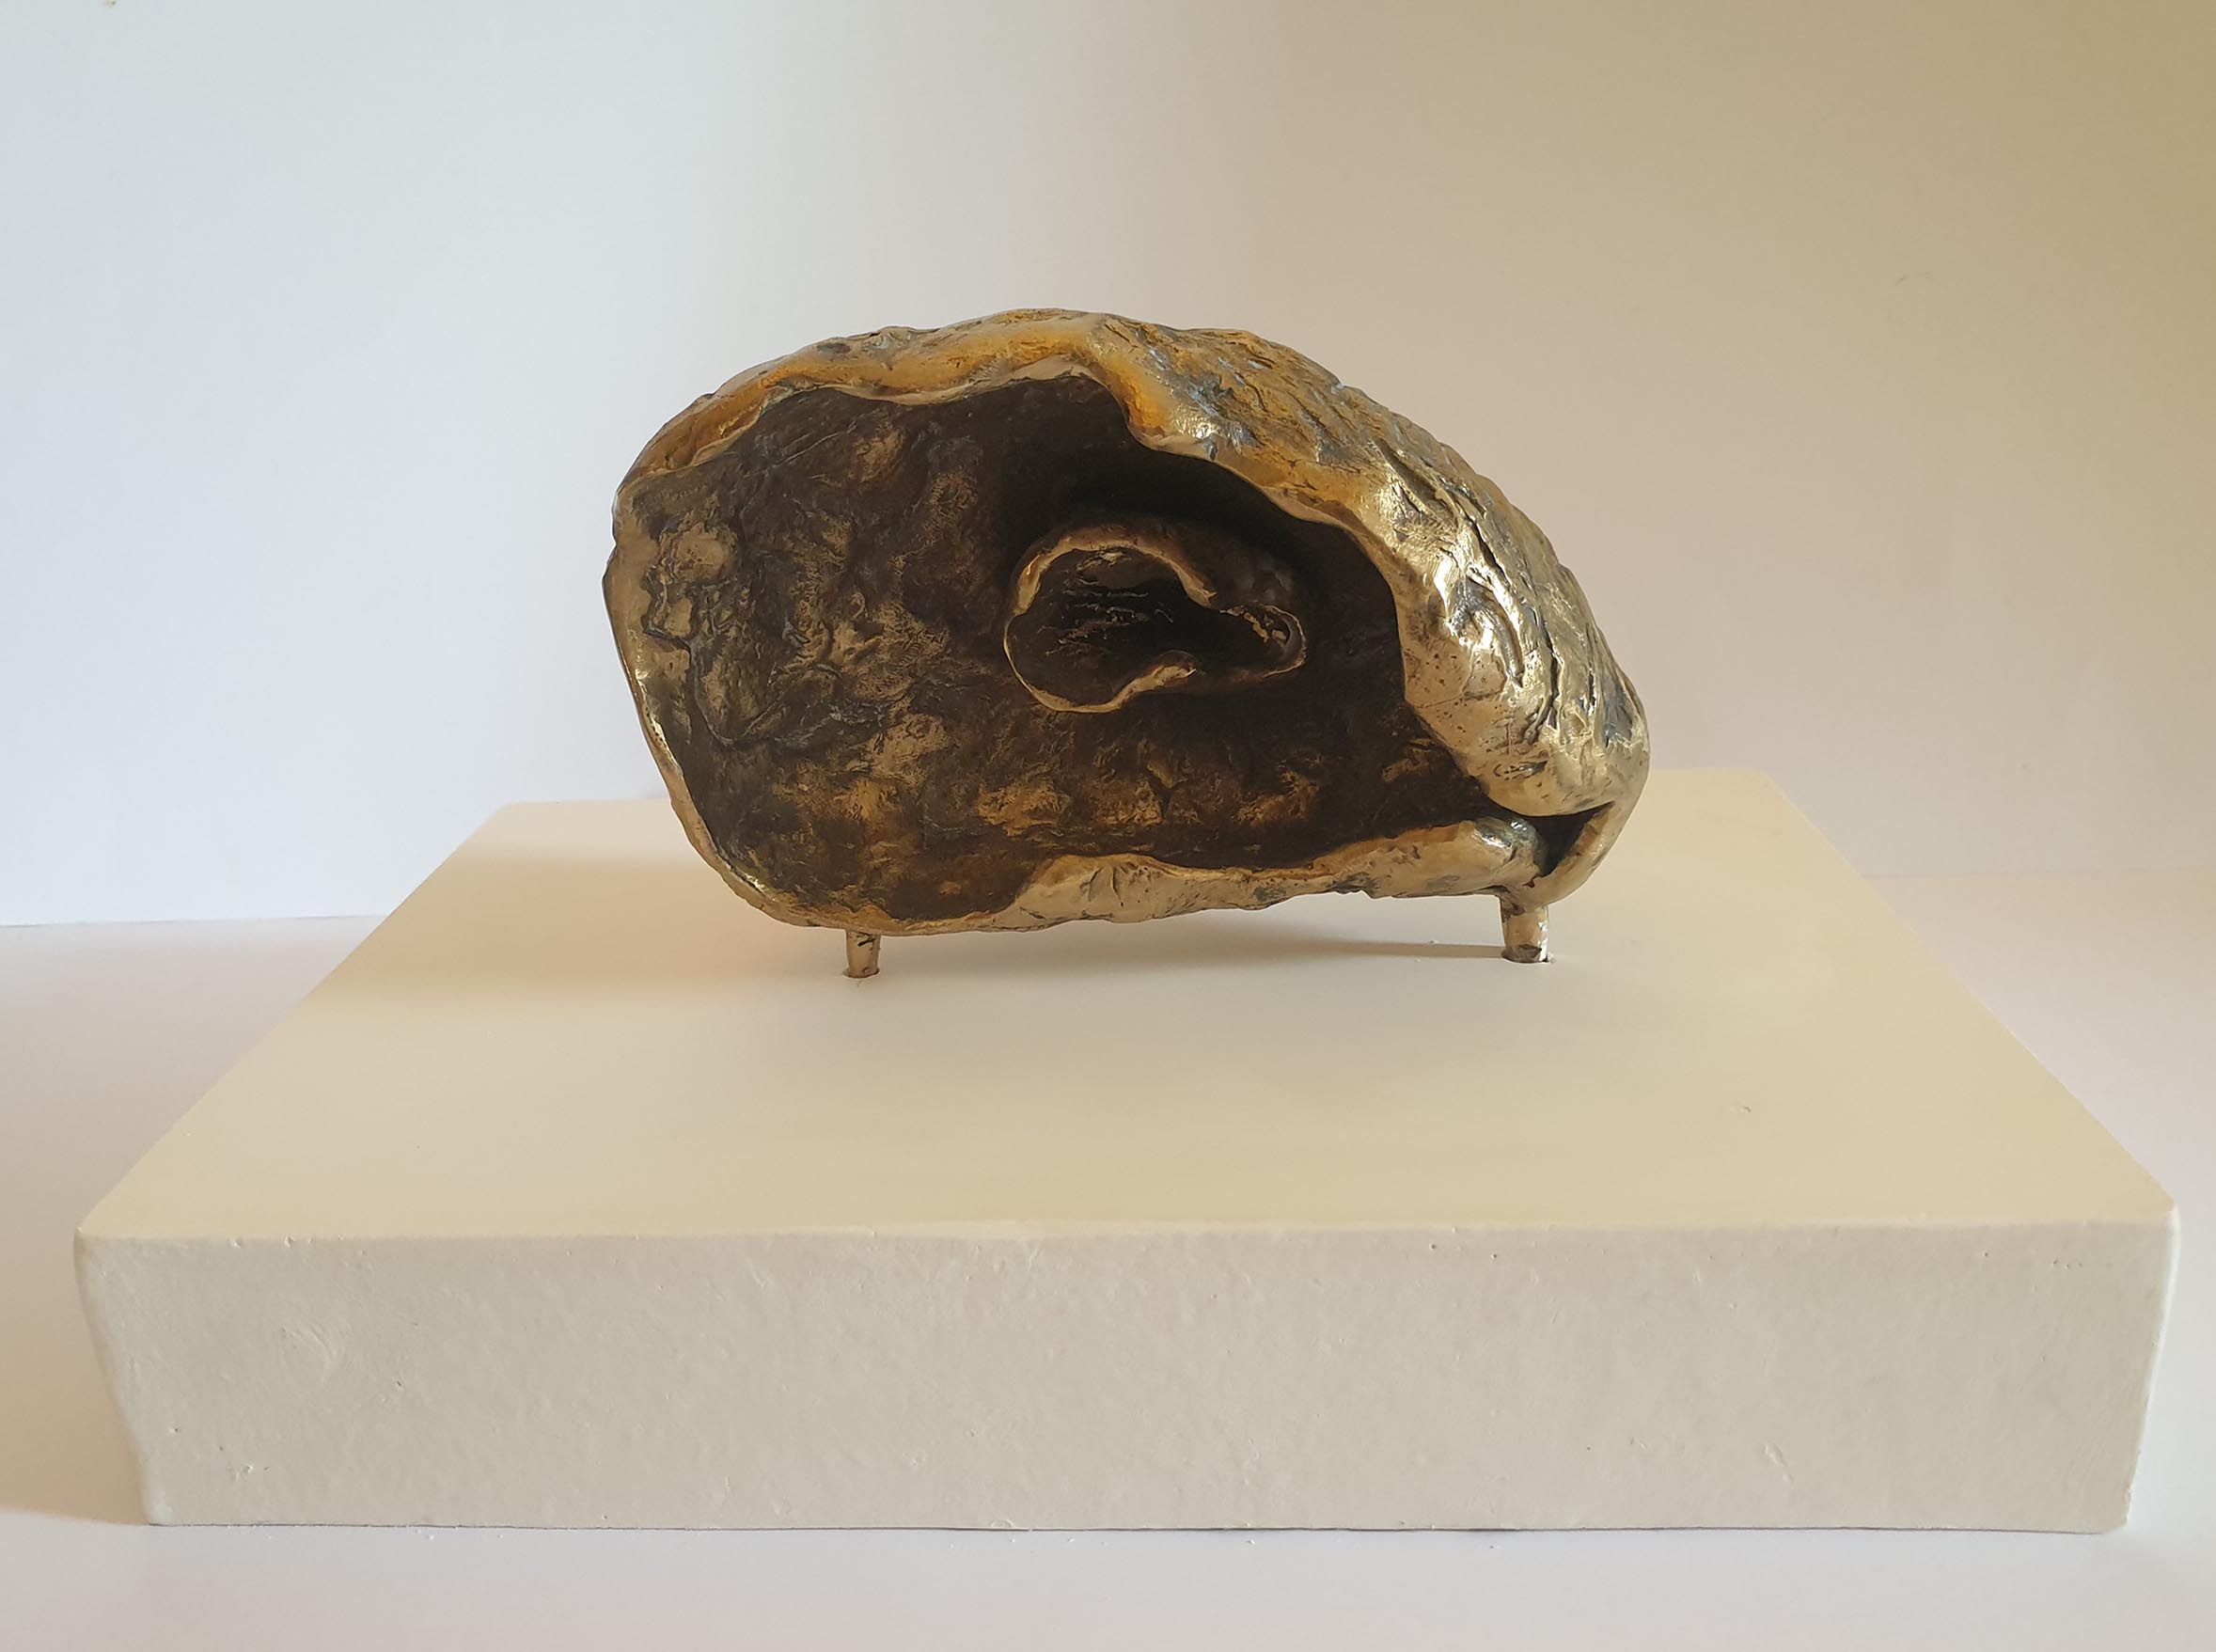 Curved bronze shell shape, softly textured and engraved, with organic pattern and fossil imprint on the back, containing central small shell shape. Little legs protrude standing on rectangular plaster plinth.